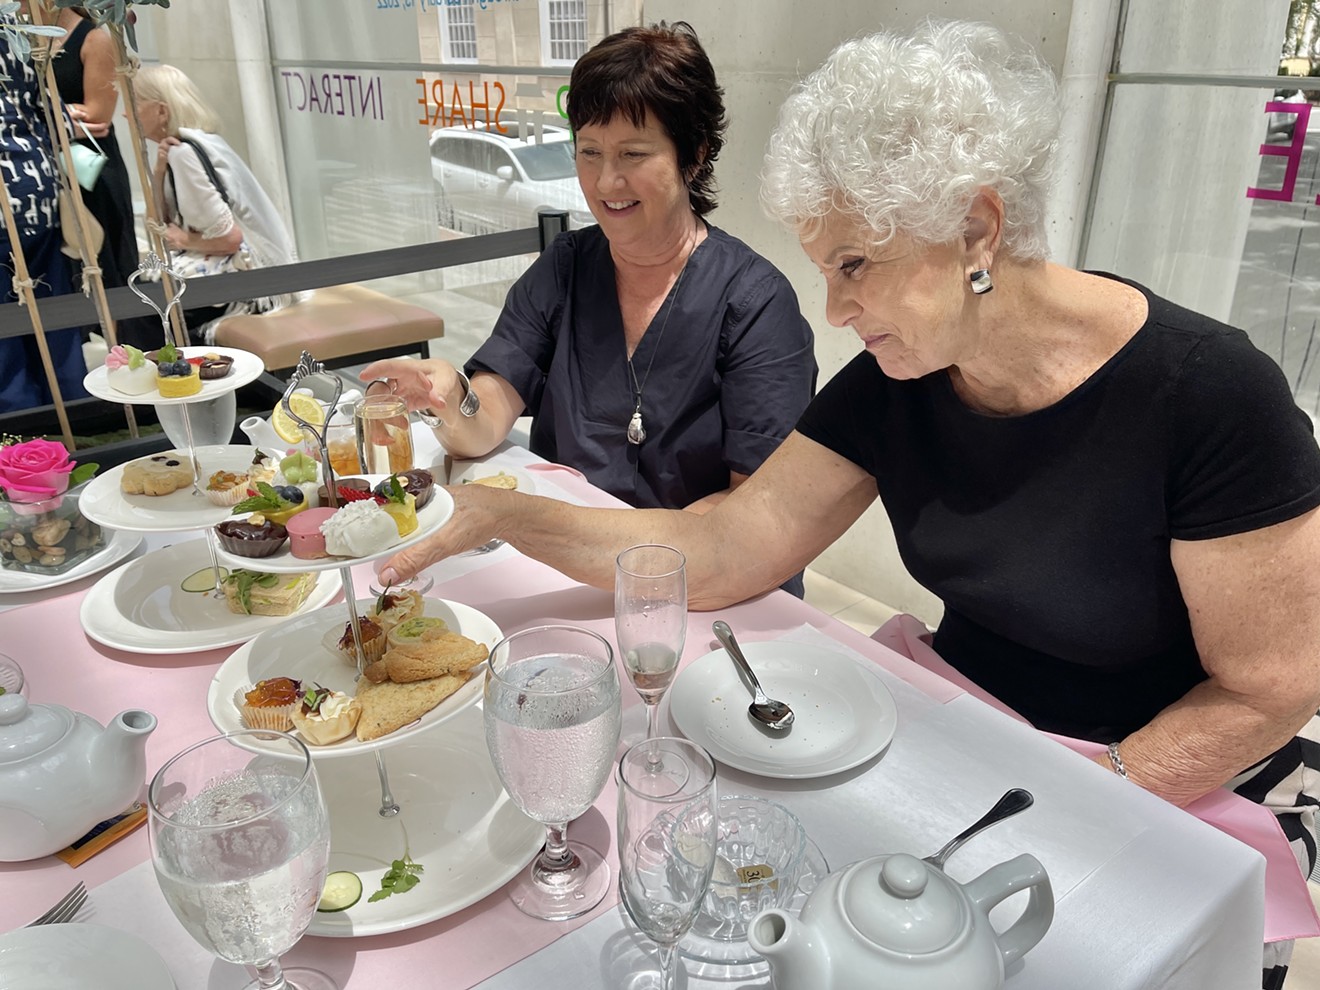 Guests help themselves to some tea time snacks during Afternoon Tea at Joe’s at the Jepson July 21 at the Telfair’s Jepson Center for the Arts.